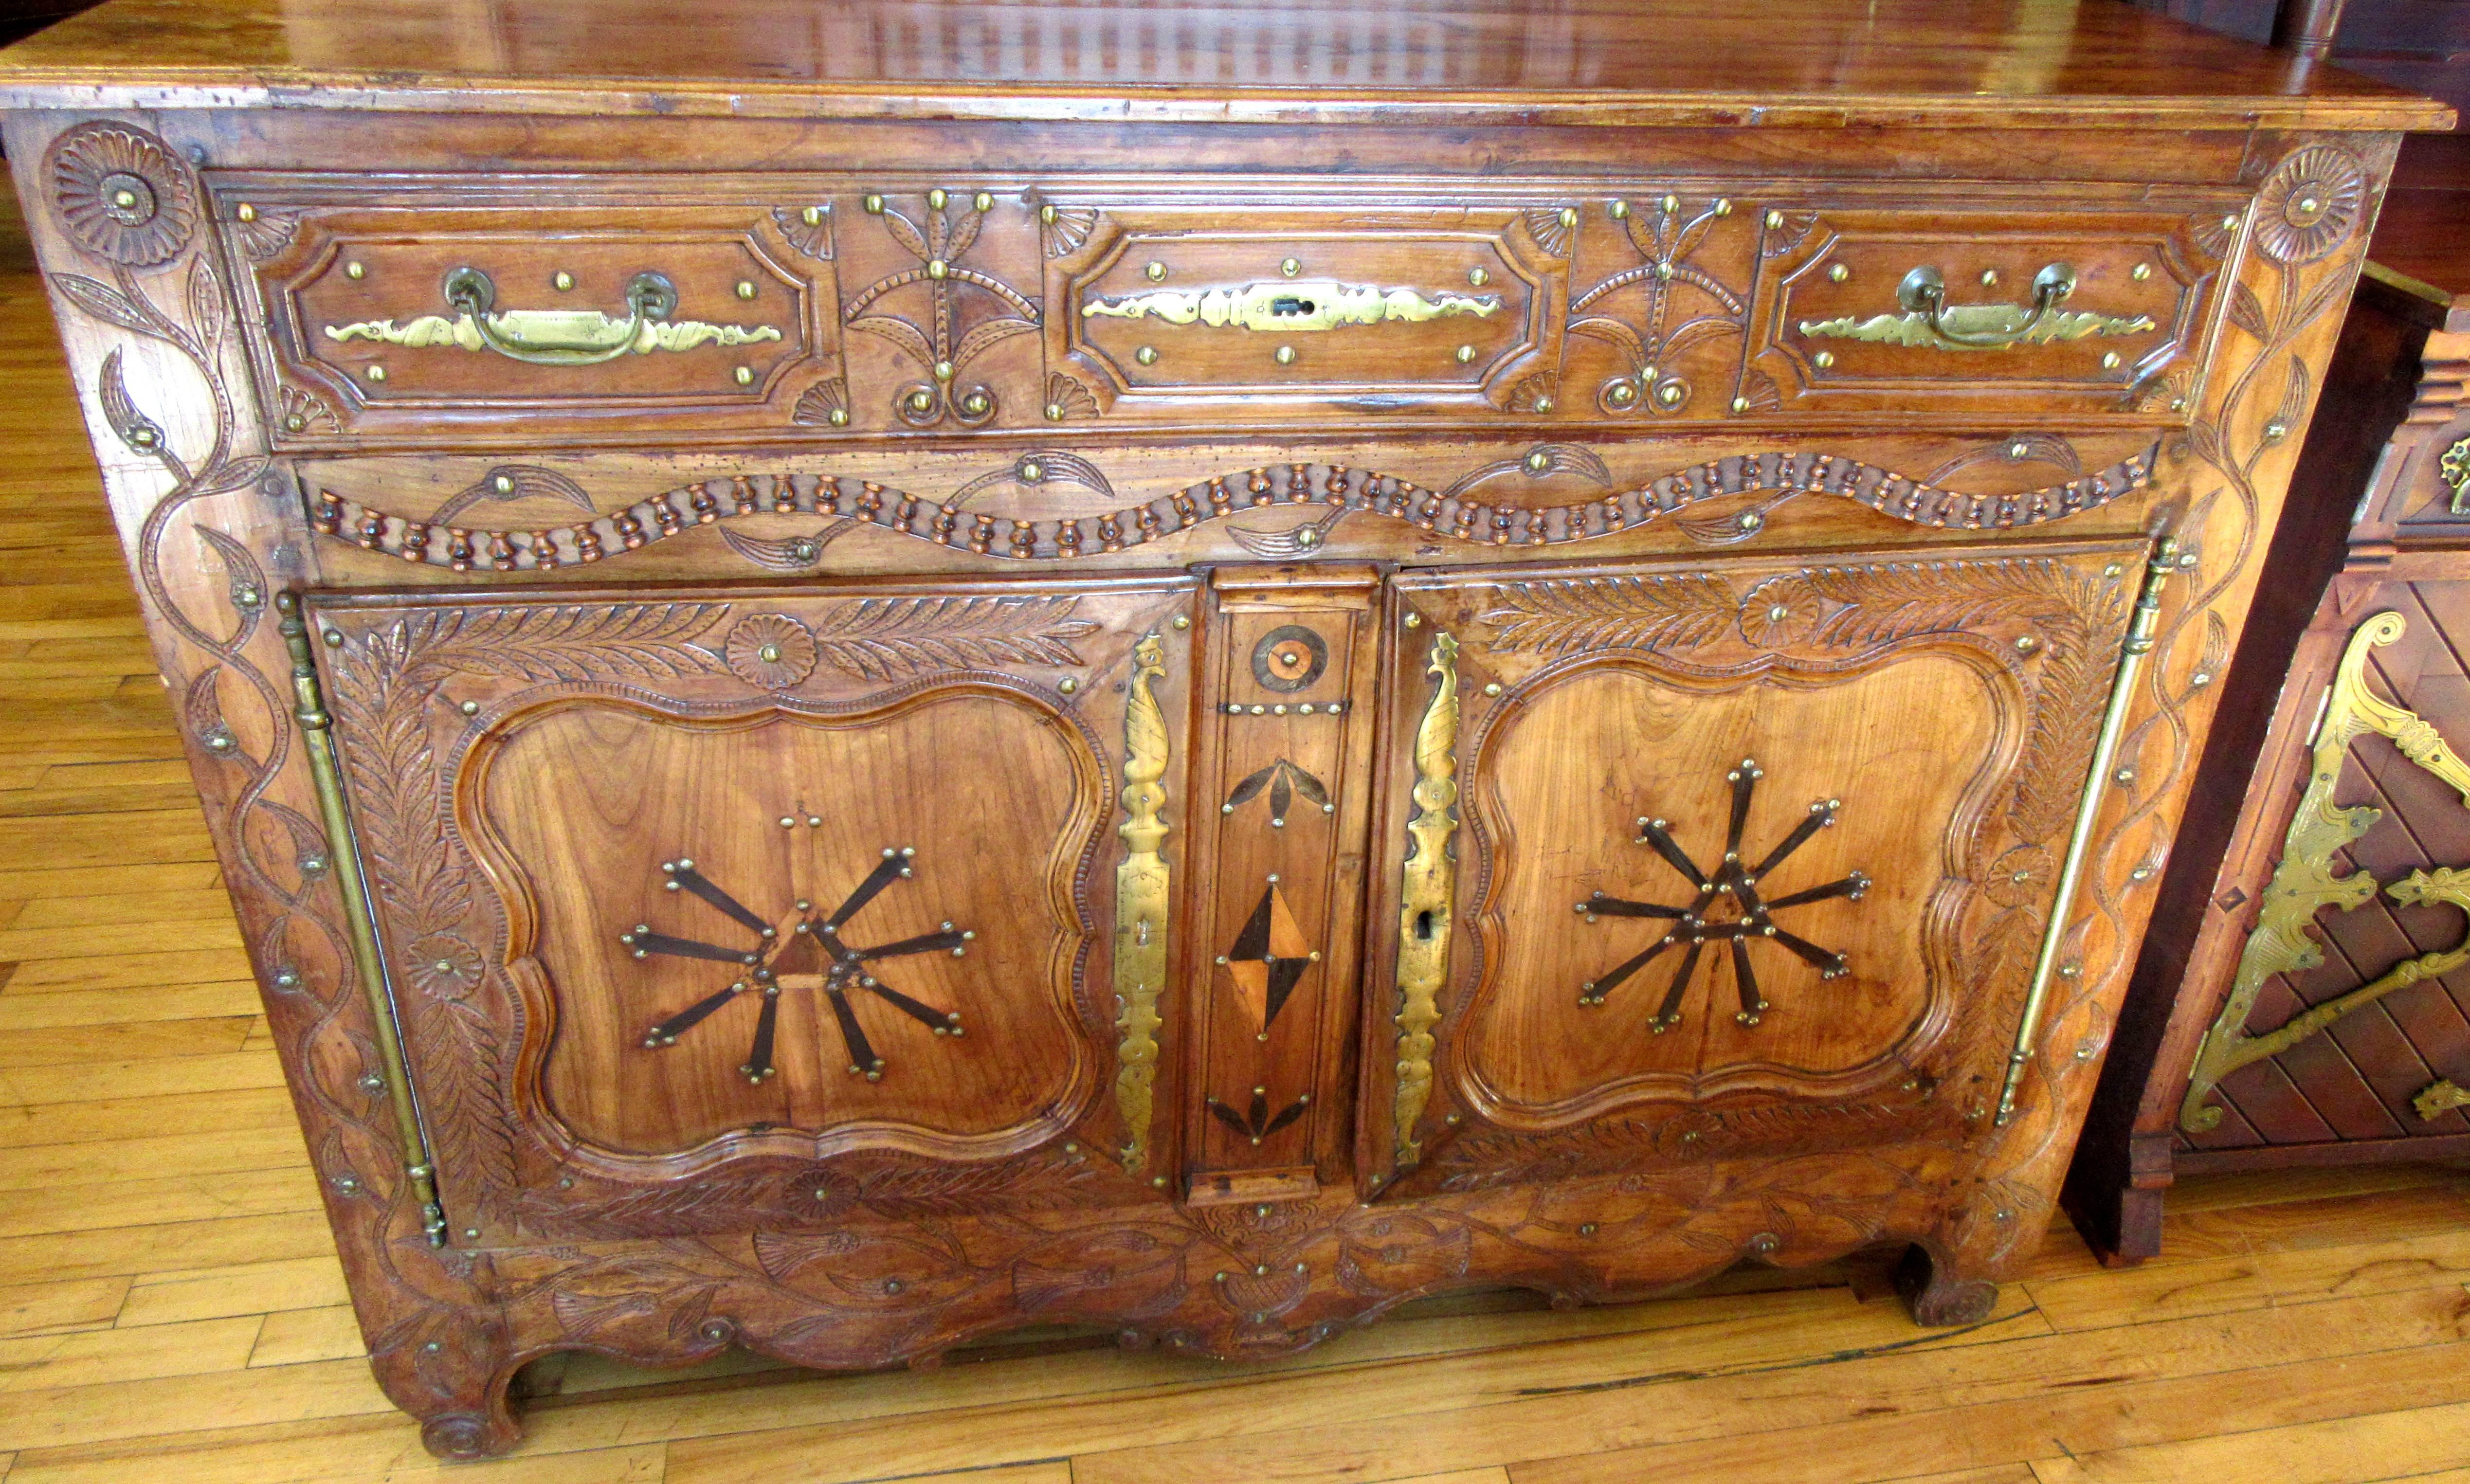 French Provincial 18th Century Chestnut Vaisselier from the Brittany Region of France